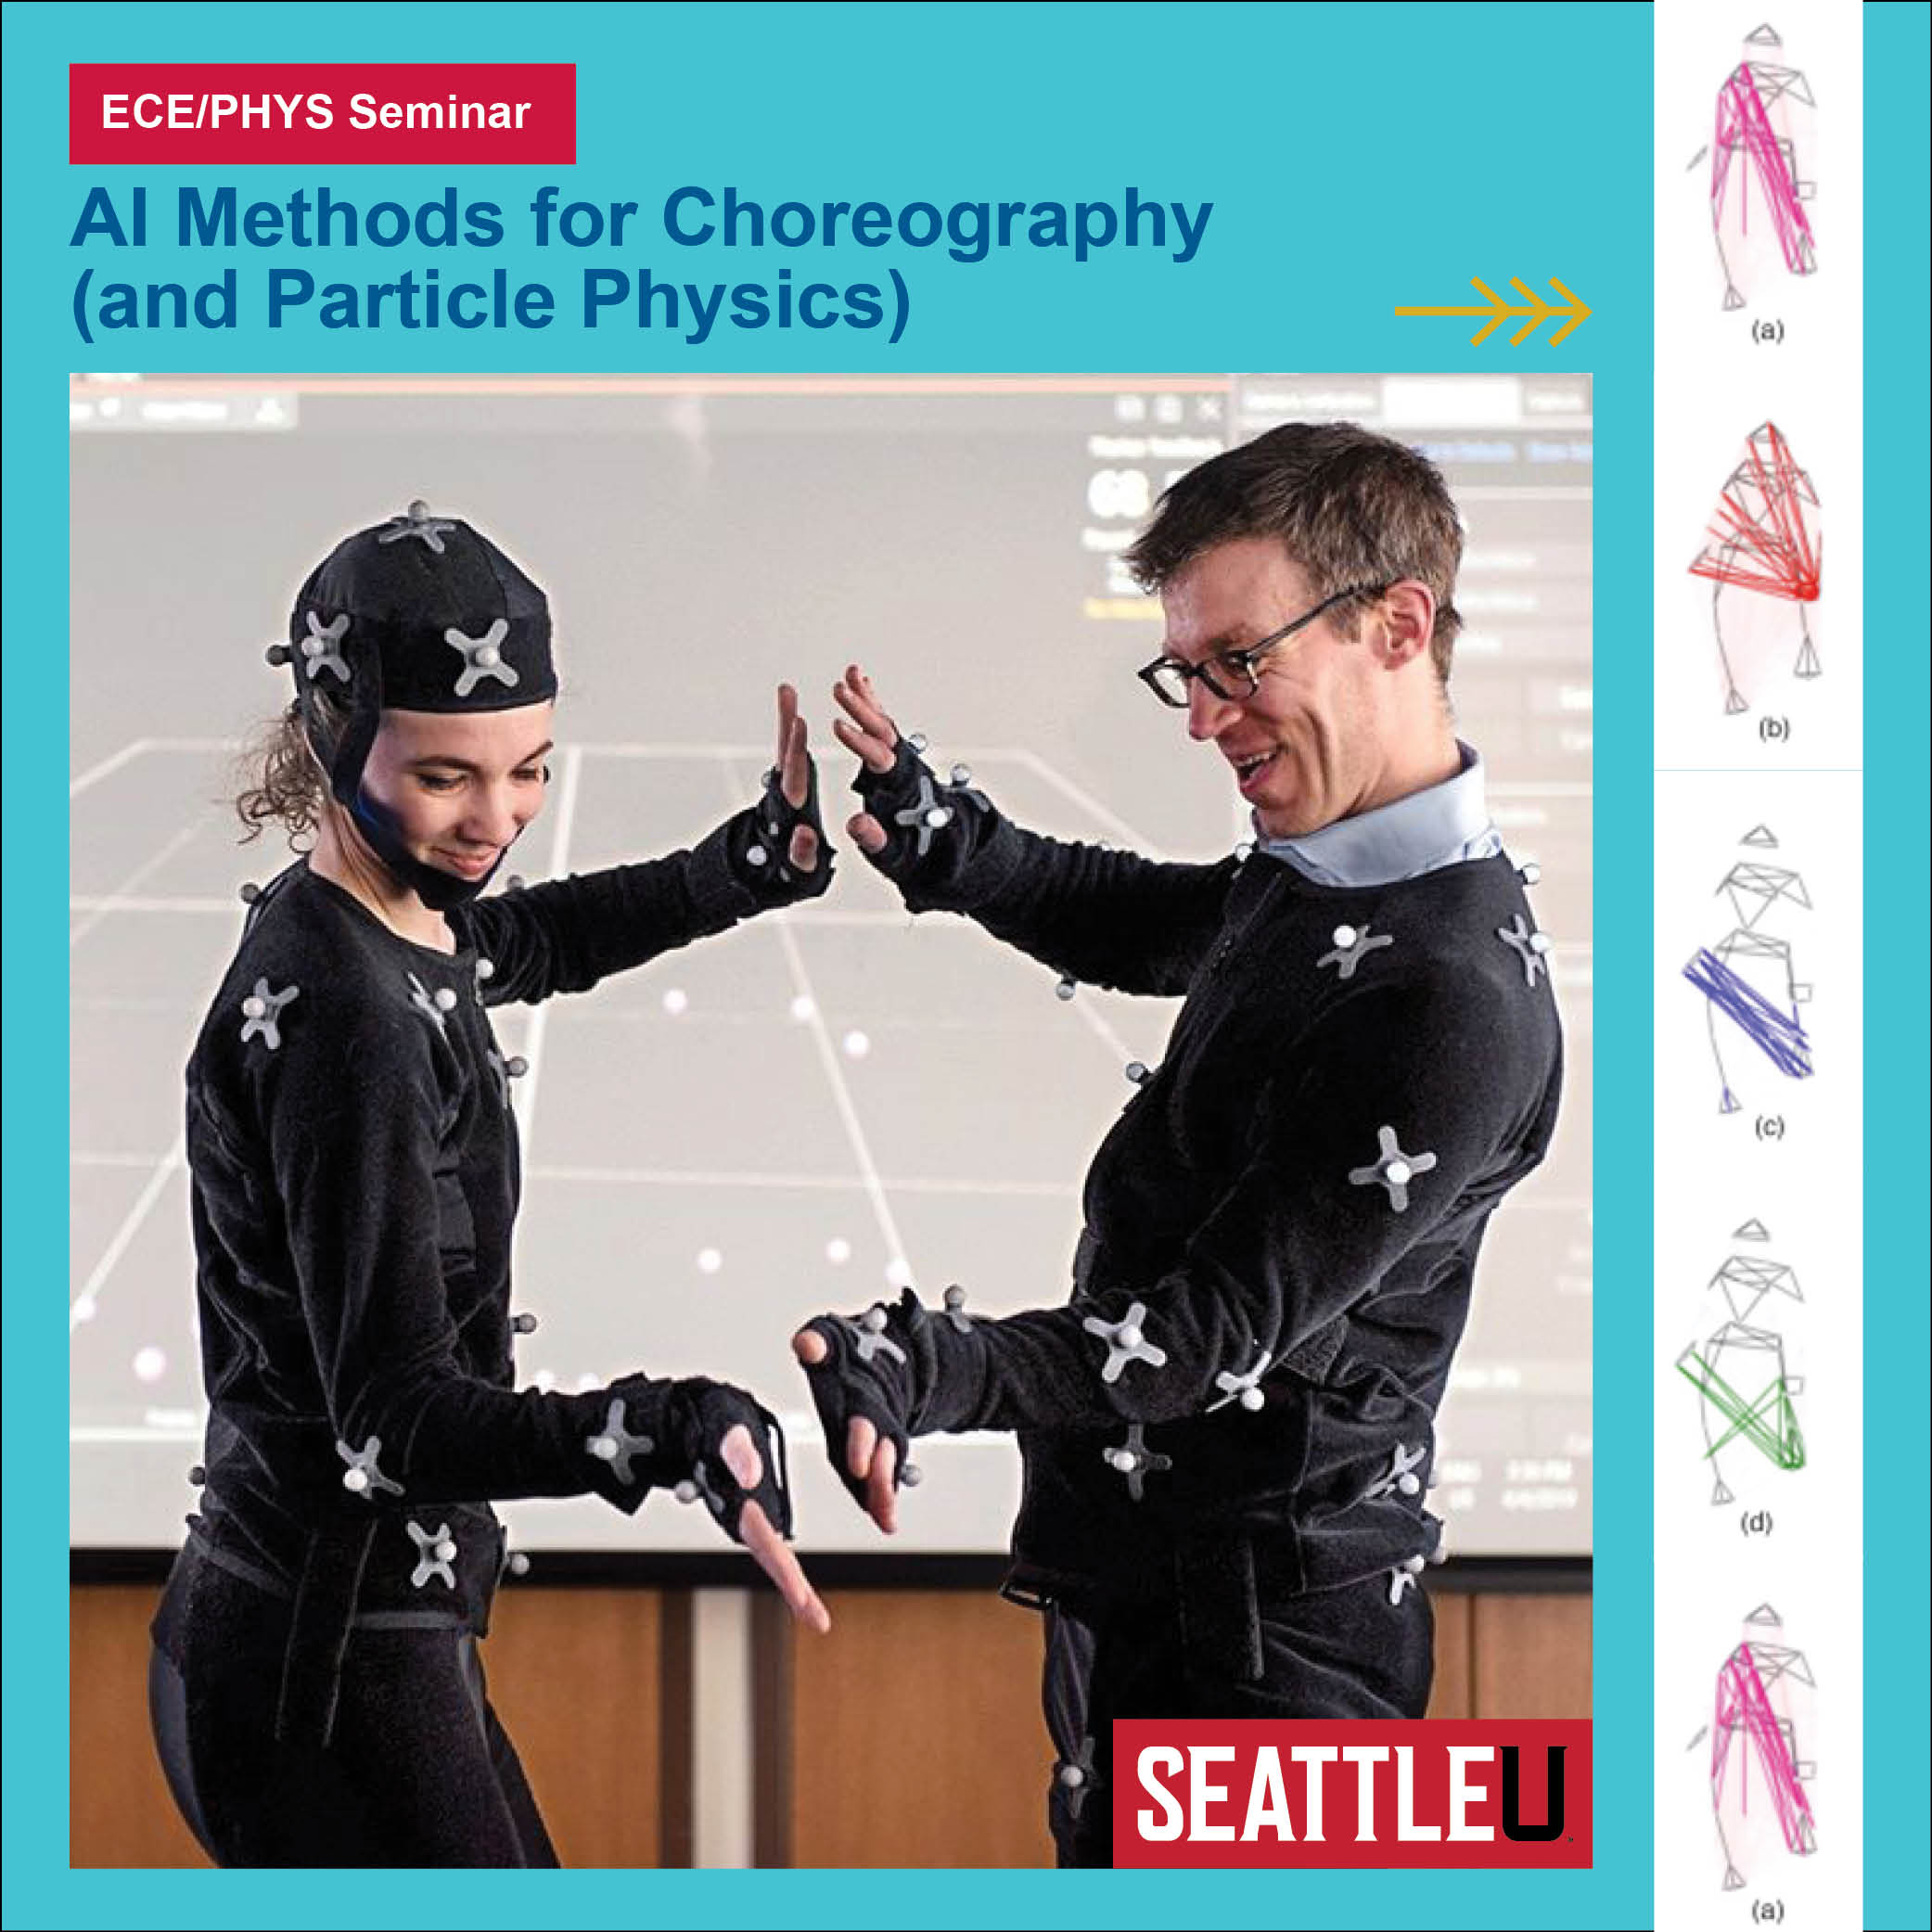 Dr. Mariel Pettee and friend in suits with sensors, Announcing ECE/PHYS Seminar at Seattle University 